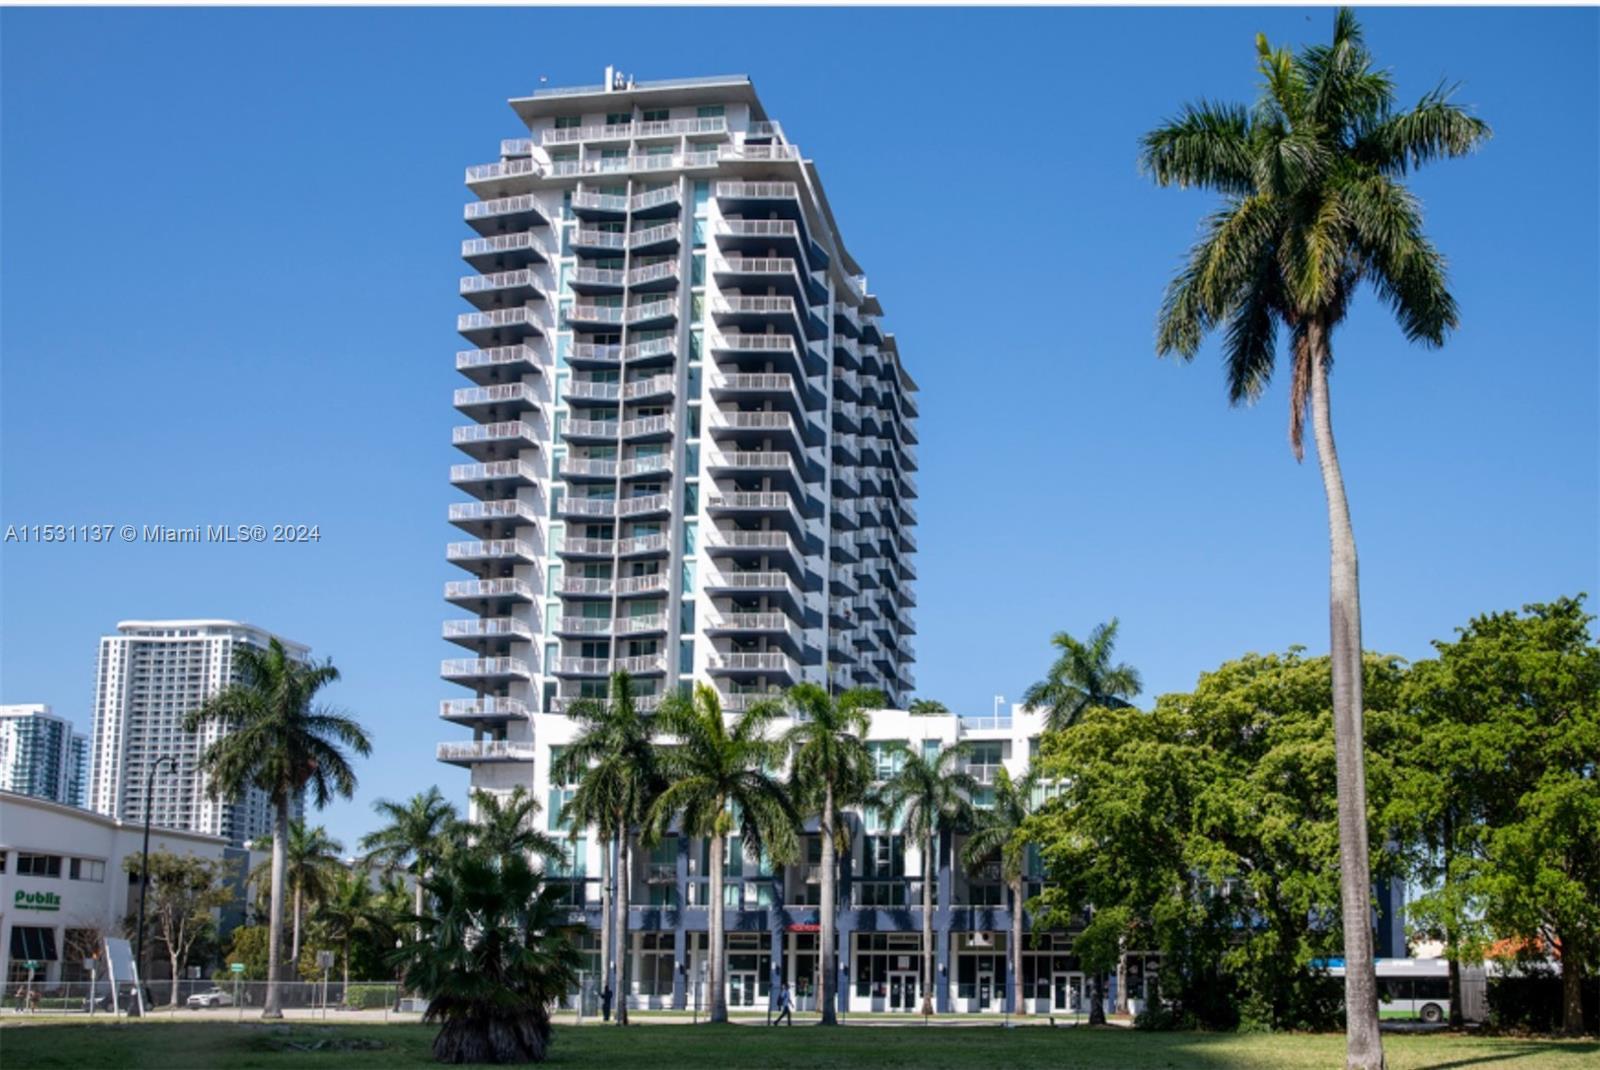 Exquisite Edgewater Retreat with Bay Views!
Step into the pinnacle of Miami lifestyle with this met